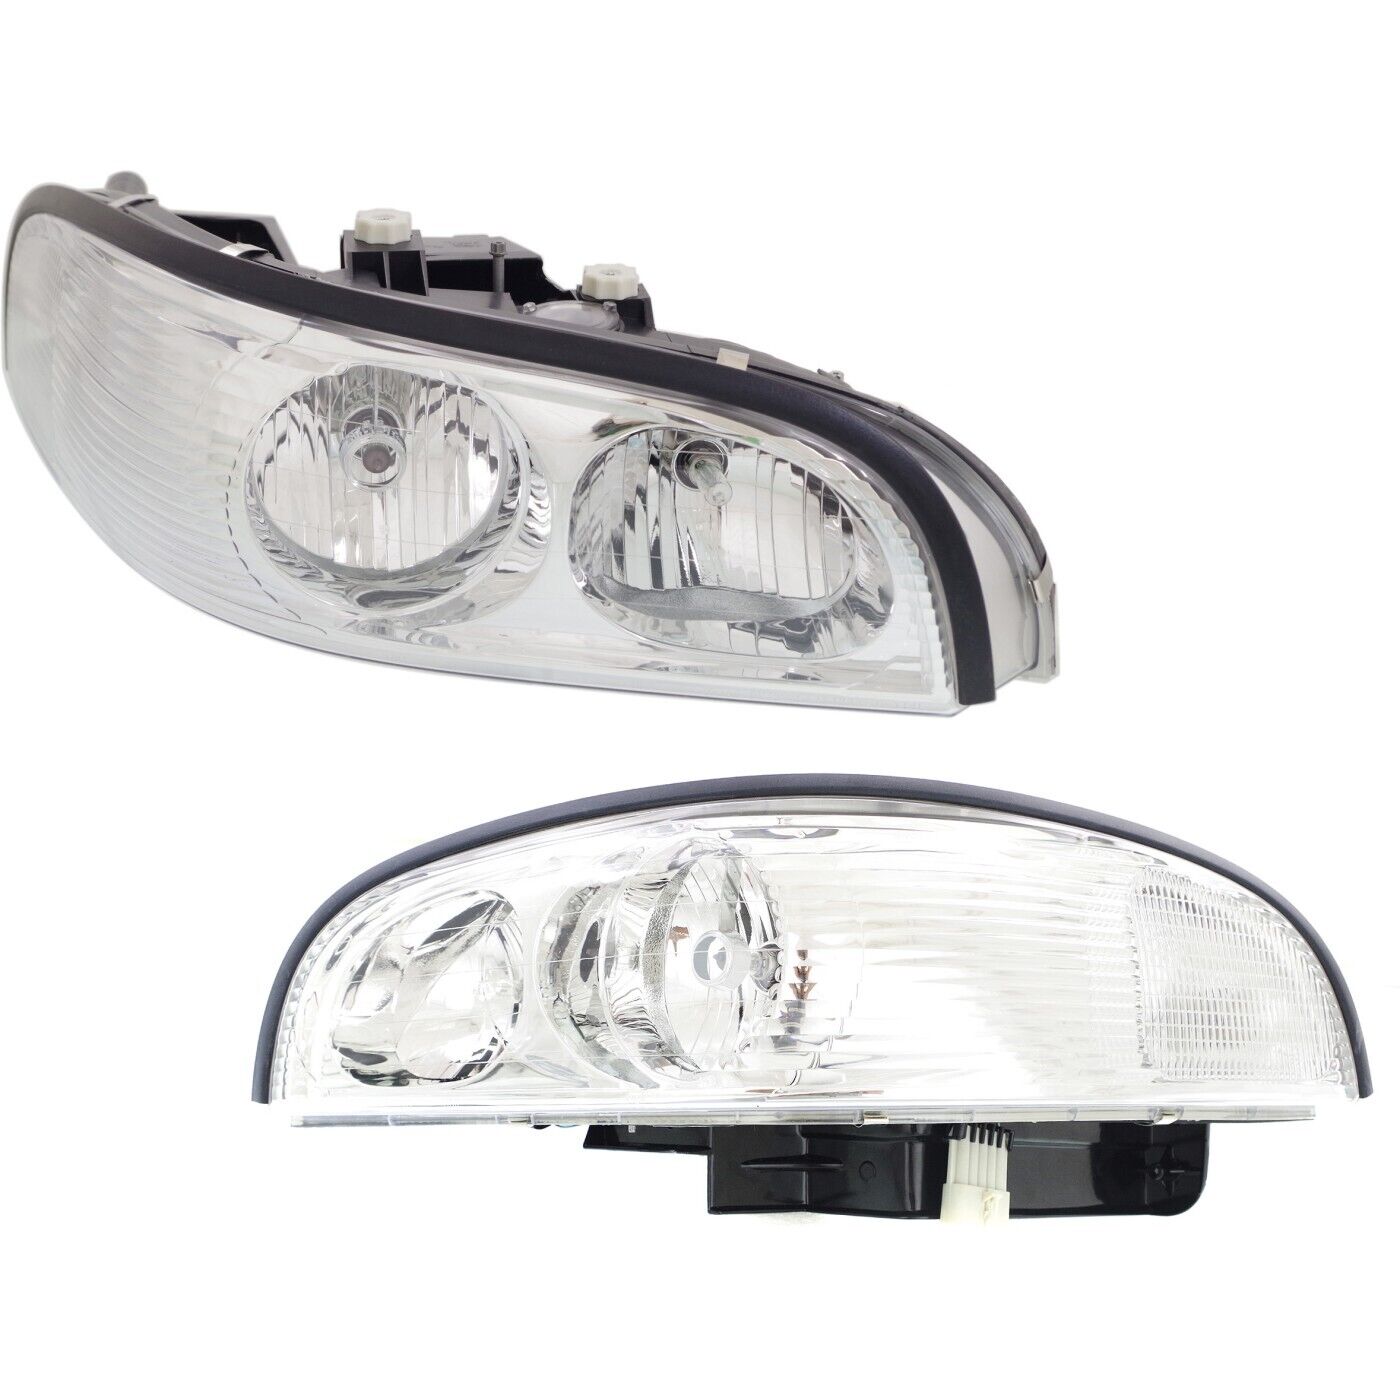 Headlight Set For 97-2005 Buick Park Avenue Sedan Left and Right With Bulb 2Pc